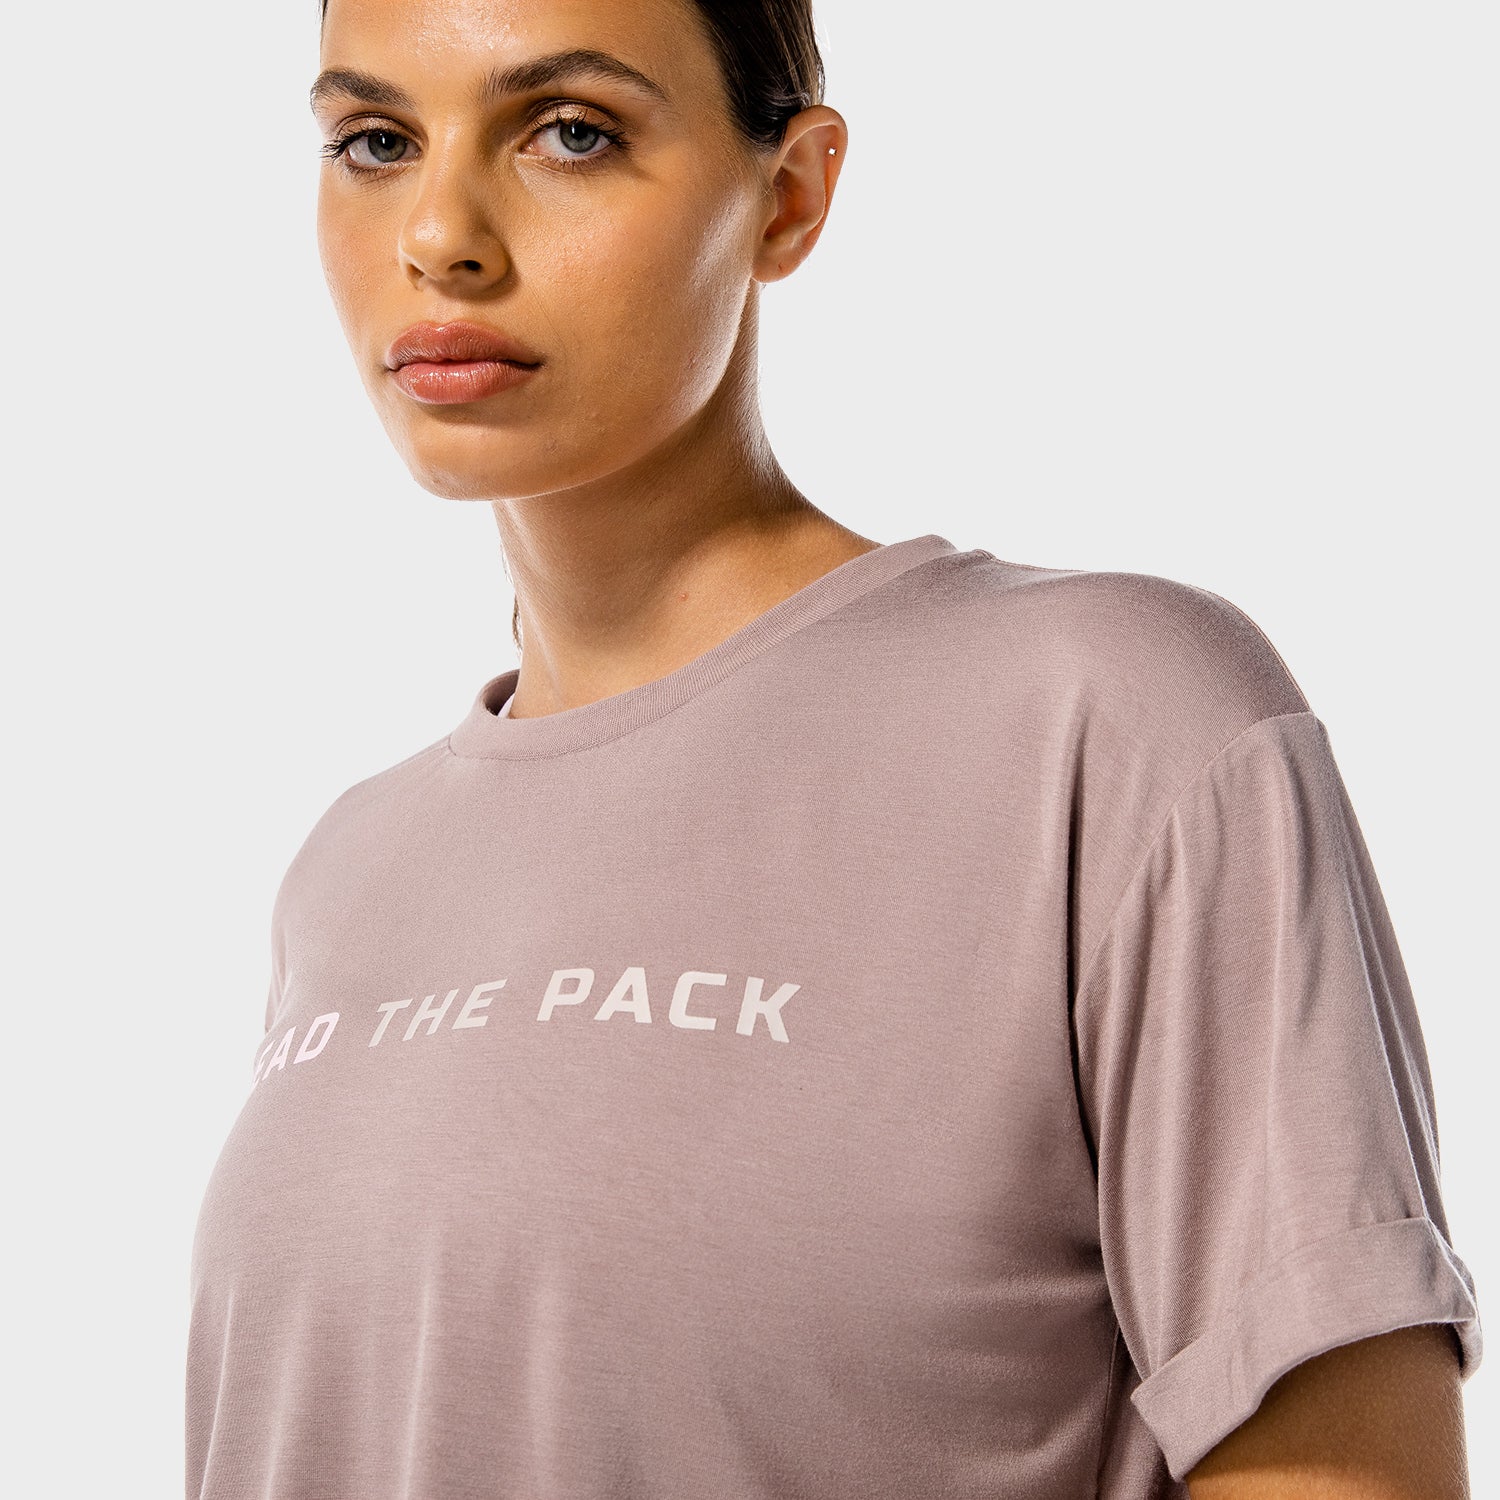 squatwolf-gym-t-shirts-for-women-the-pack-tee-taupe-workout-clothes